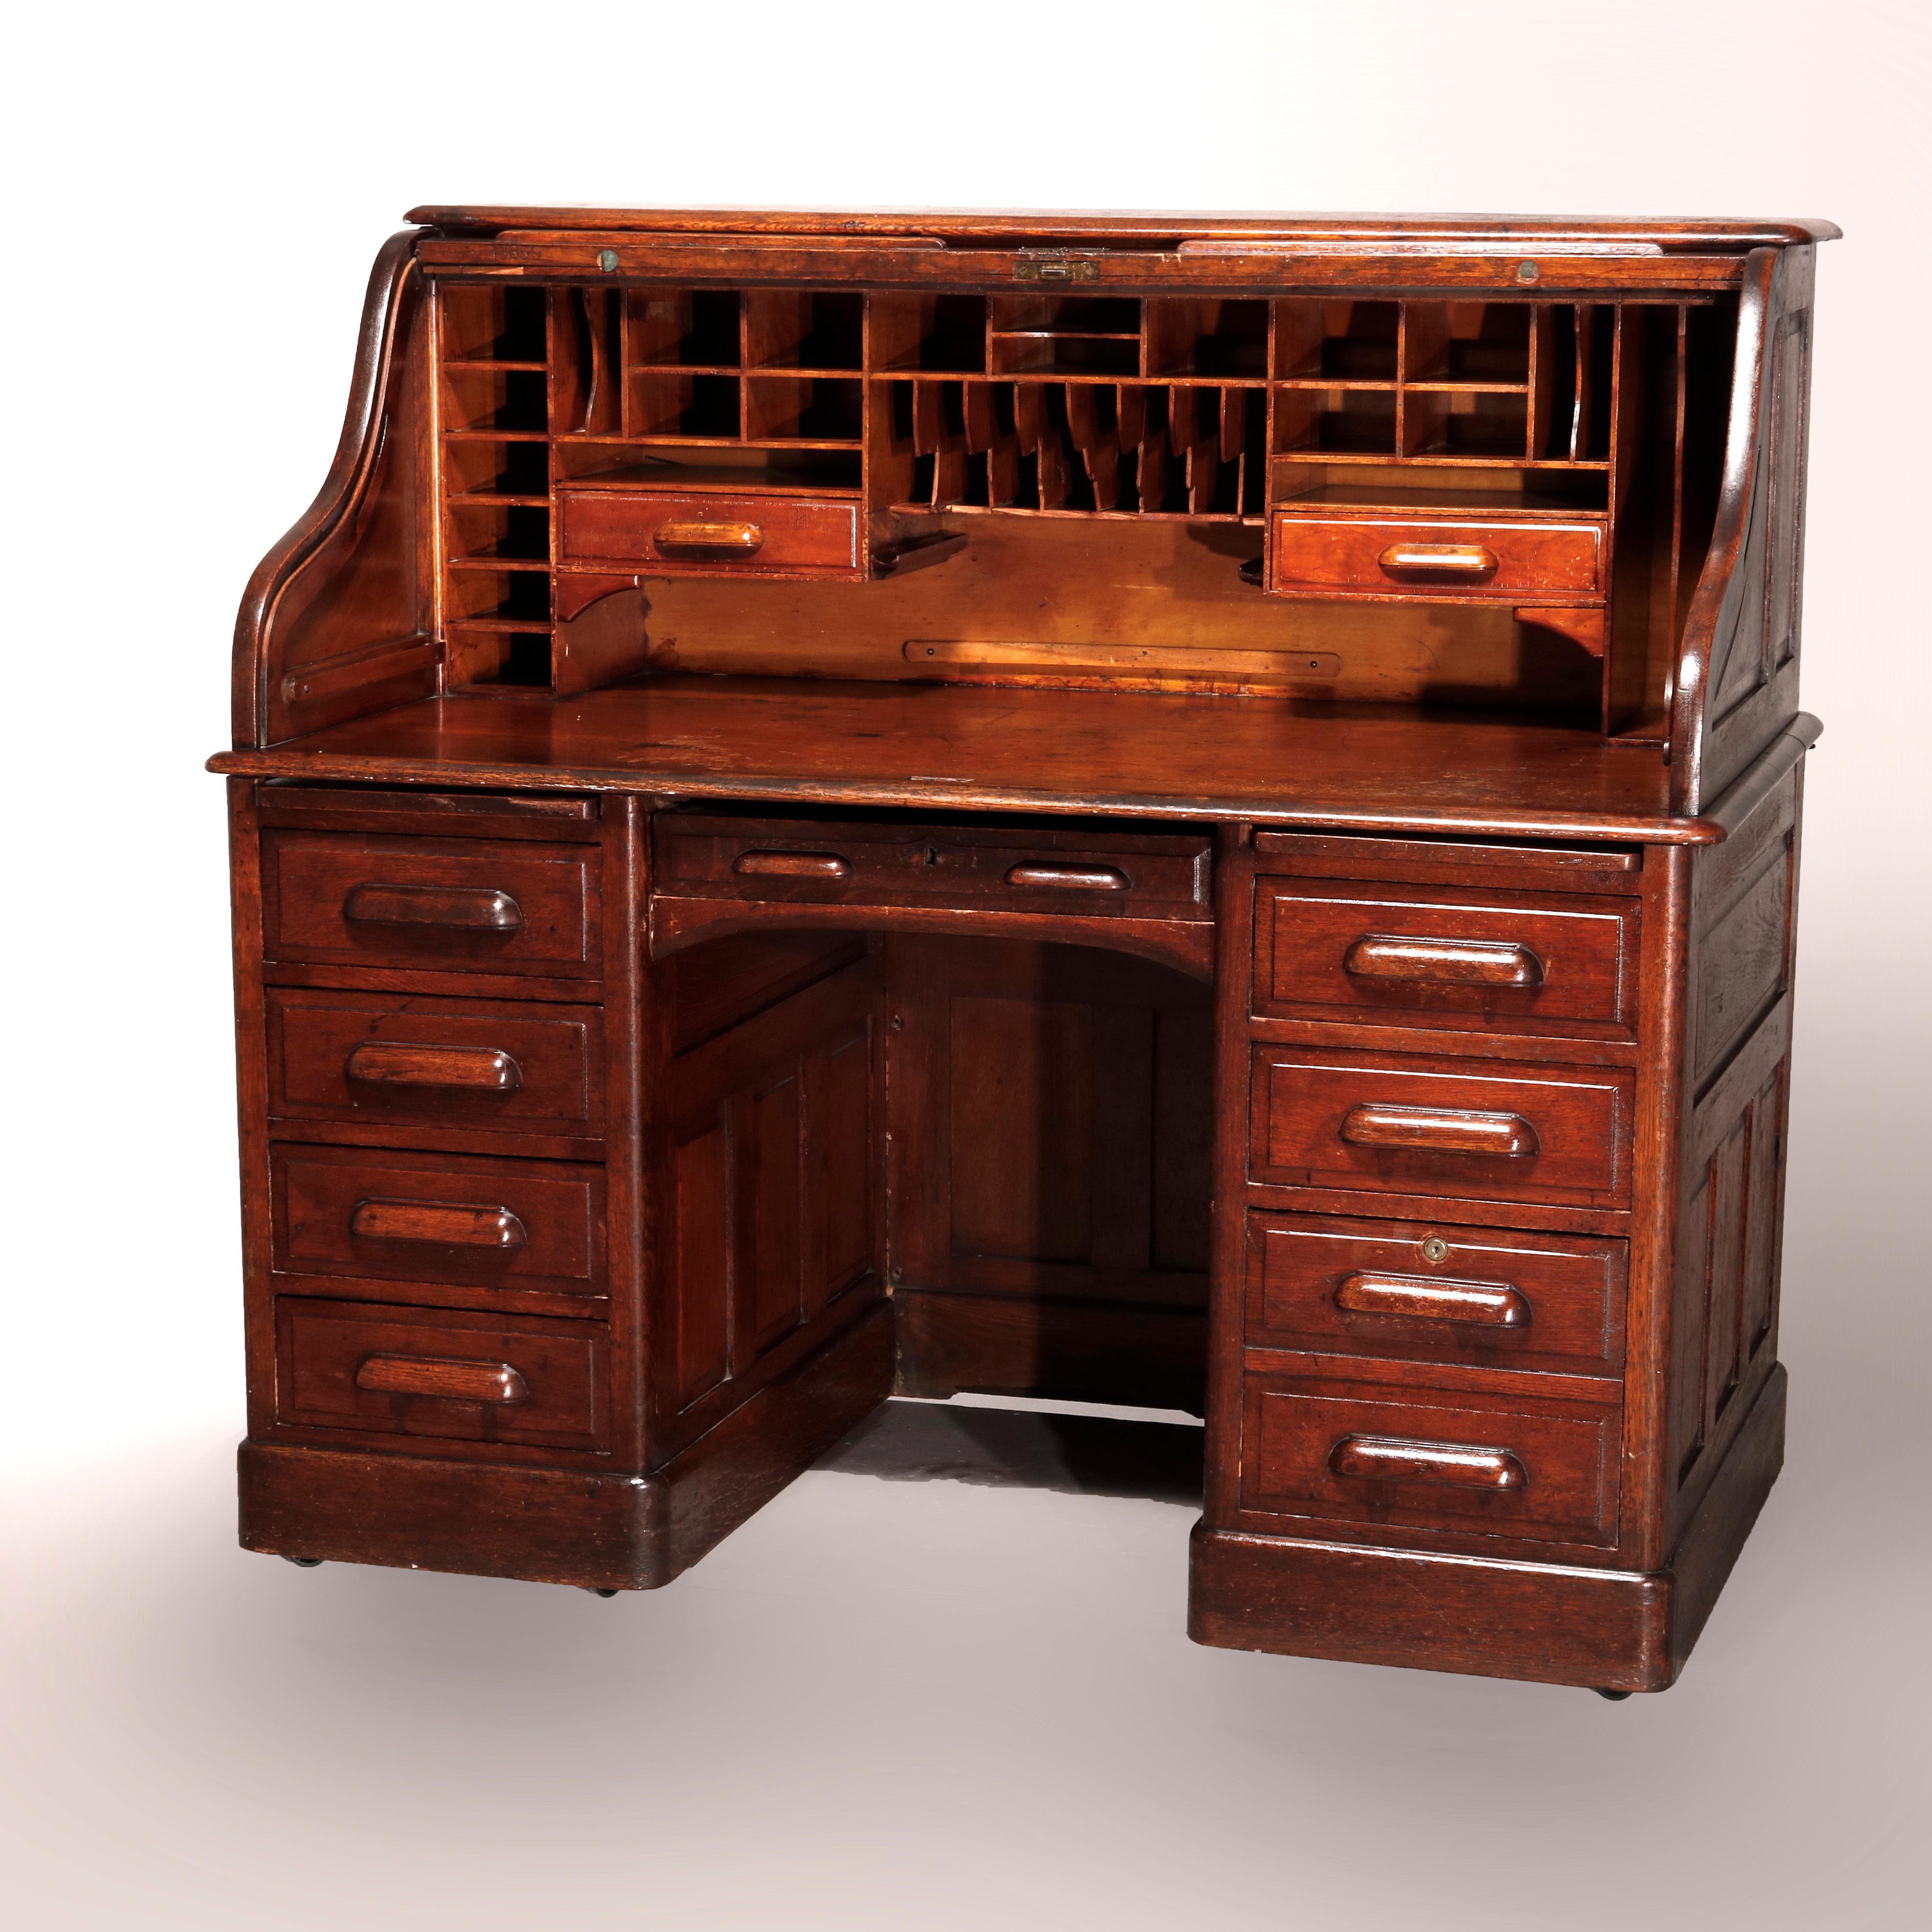 An antique desk in the manner of Derby offers quarter sawn oak construction with S-form roll top opening to interior pigeon holes and drawers over case with paneled sides and back, flanking drawer towers, foliate and cup handles throughout, circa